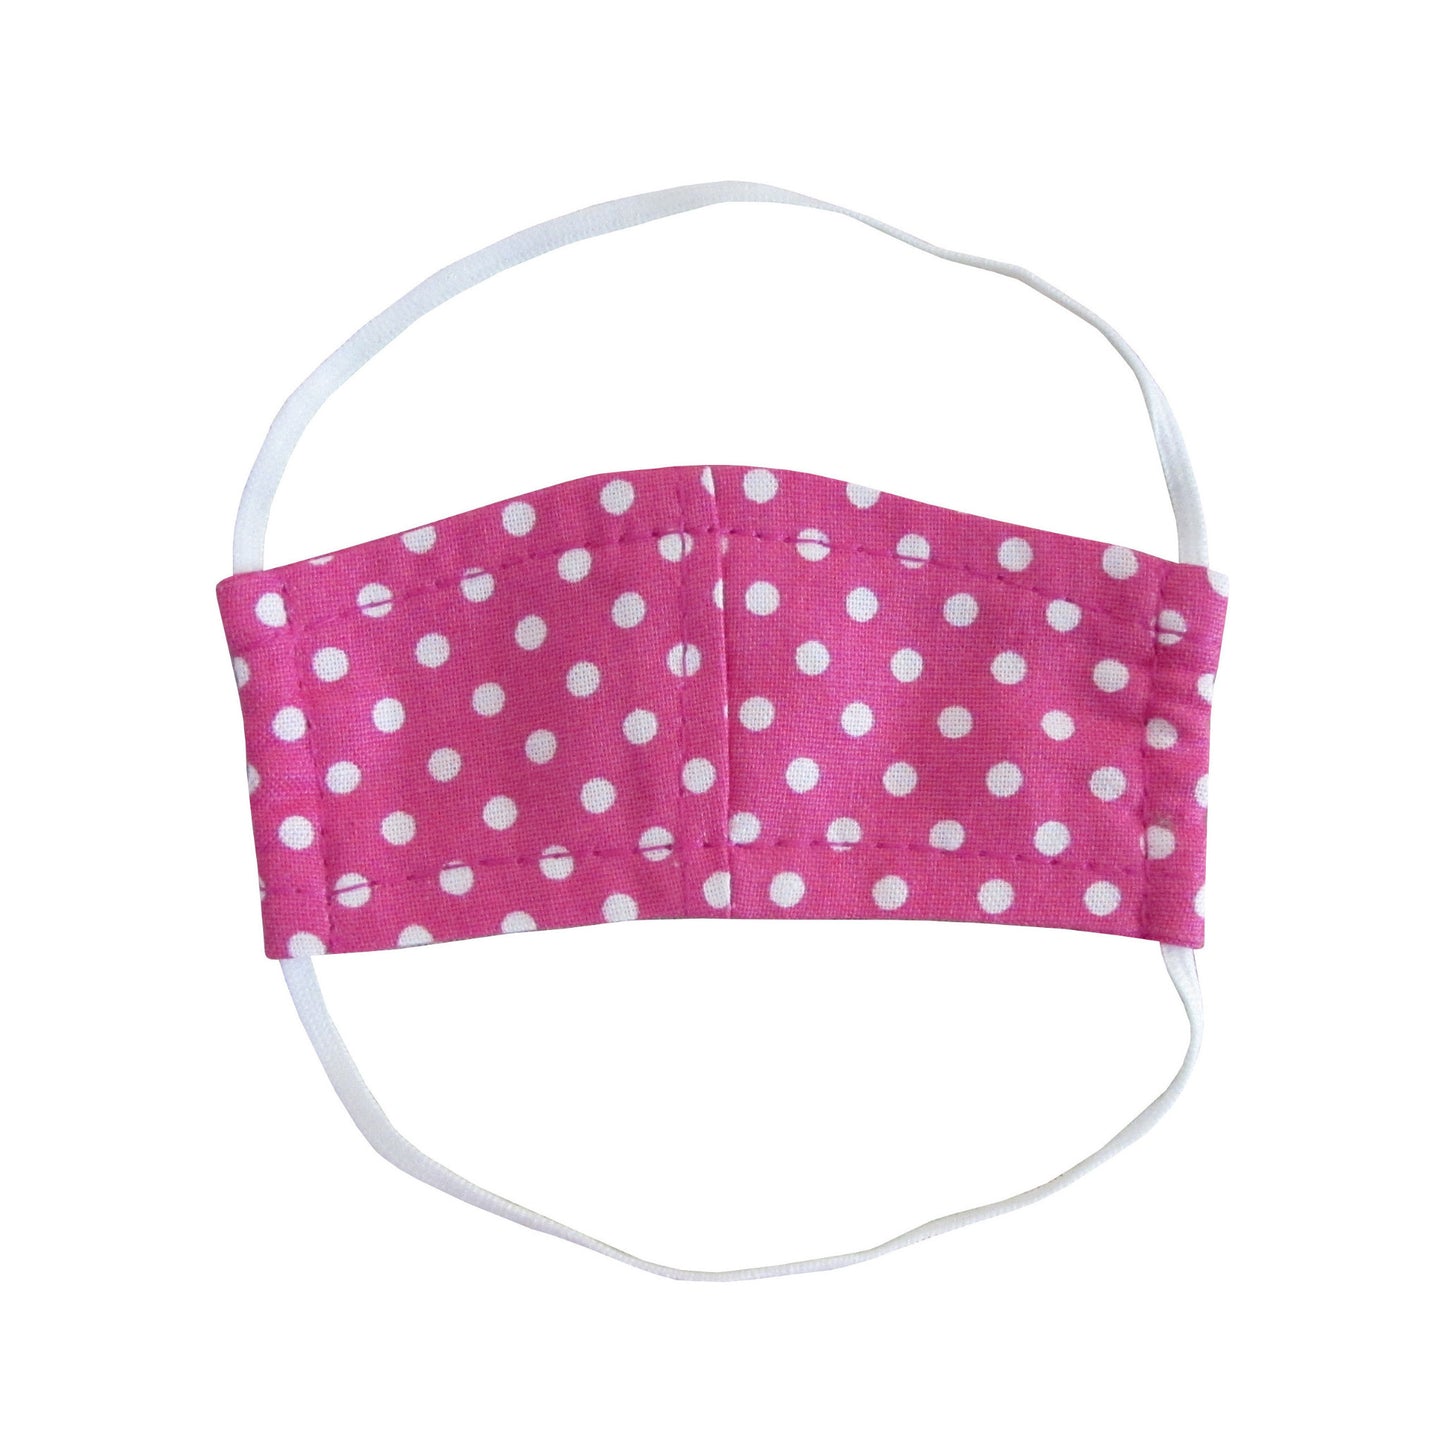 Tiny White Dots on Pink Print Doll Face Mask for 18-inch dolls Flat